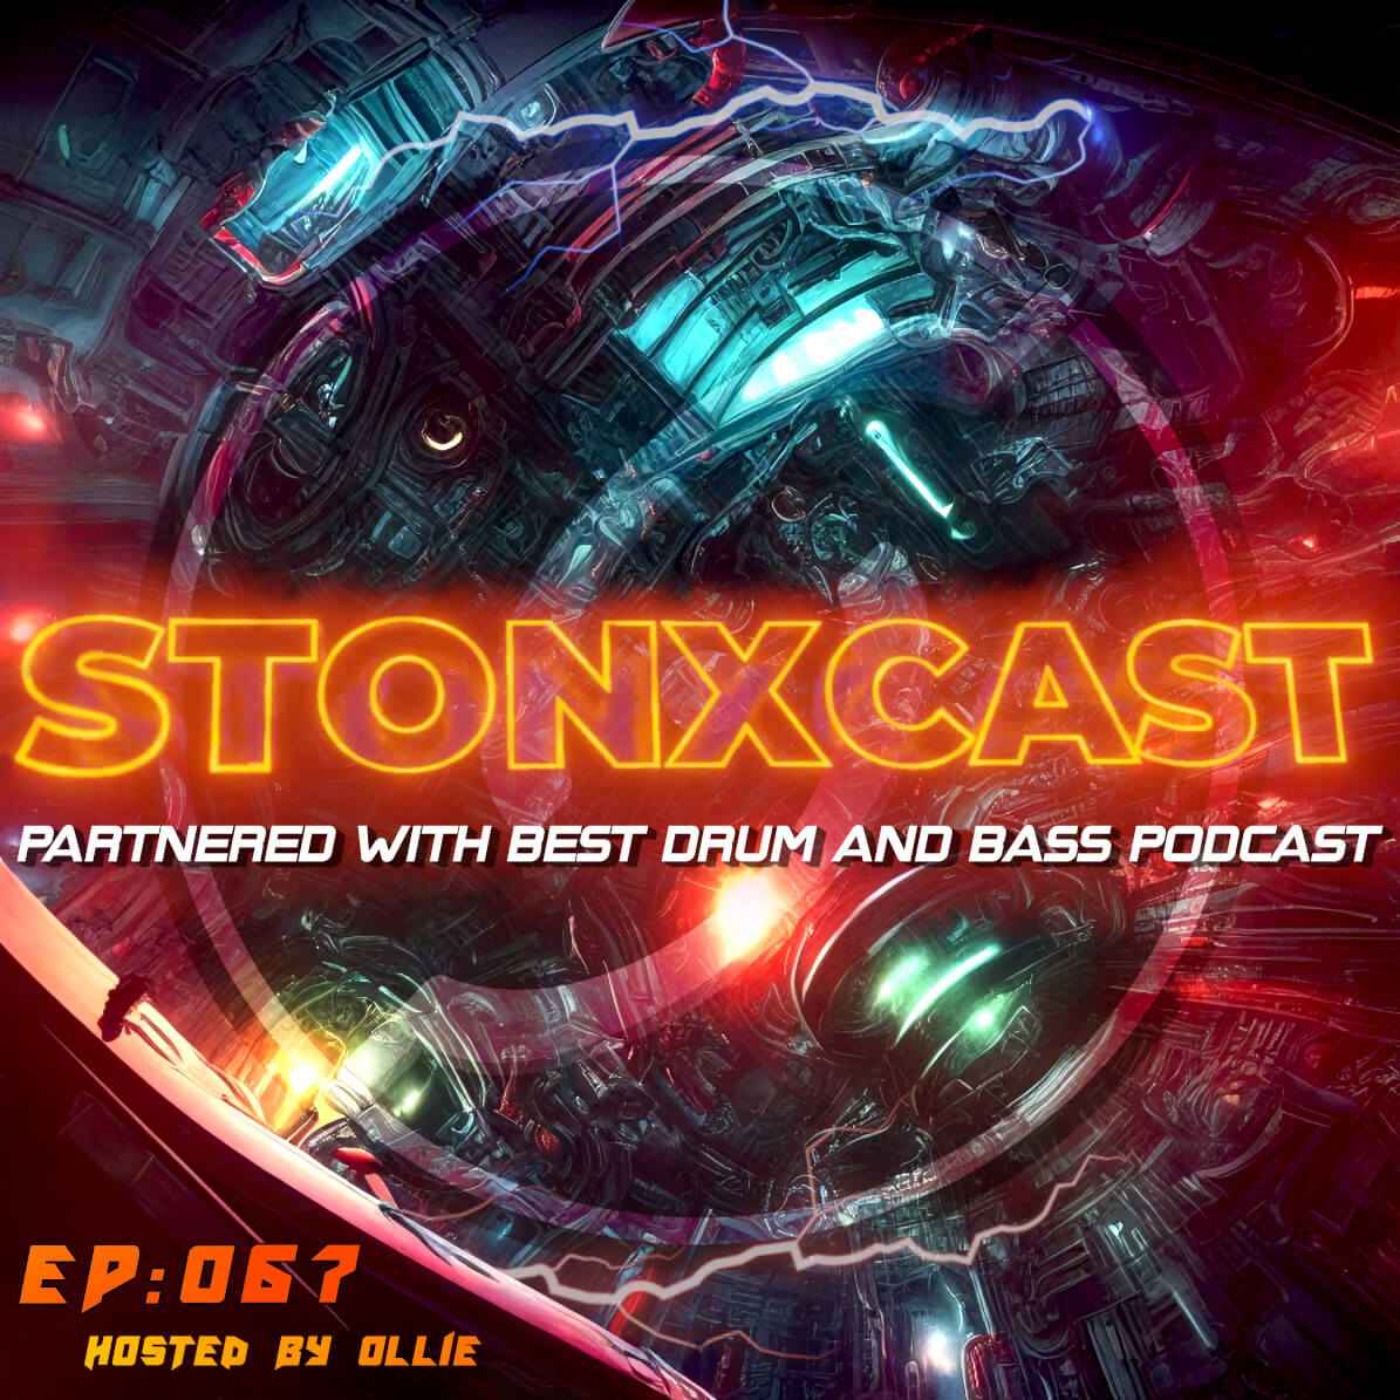 Stonxcast EP:067 - Hosted by Ollie Artwork